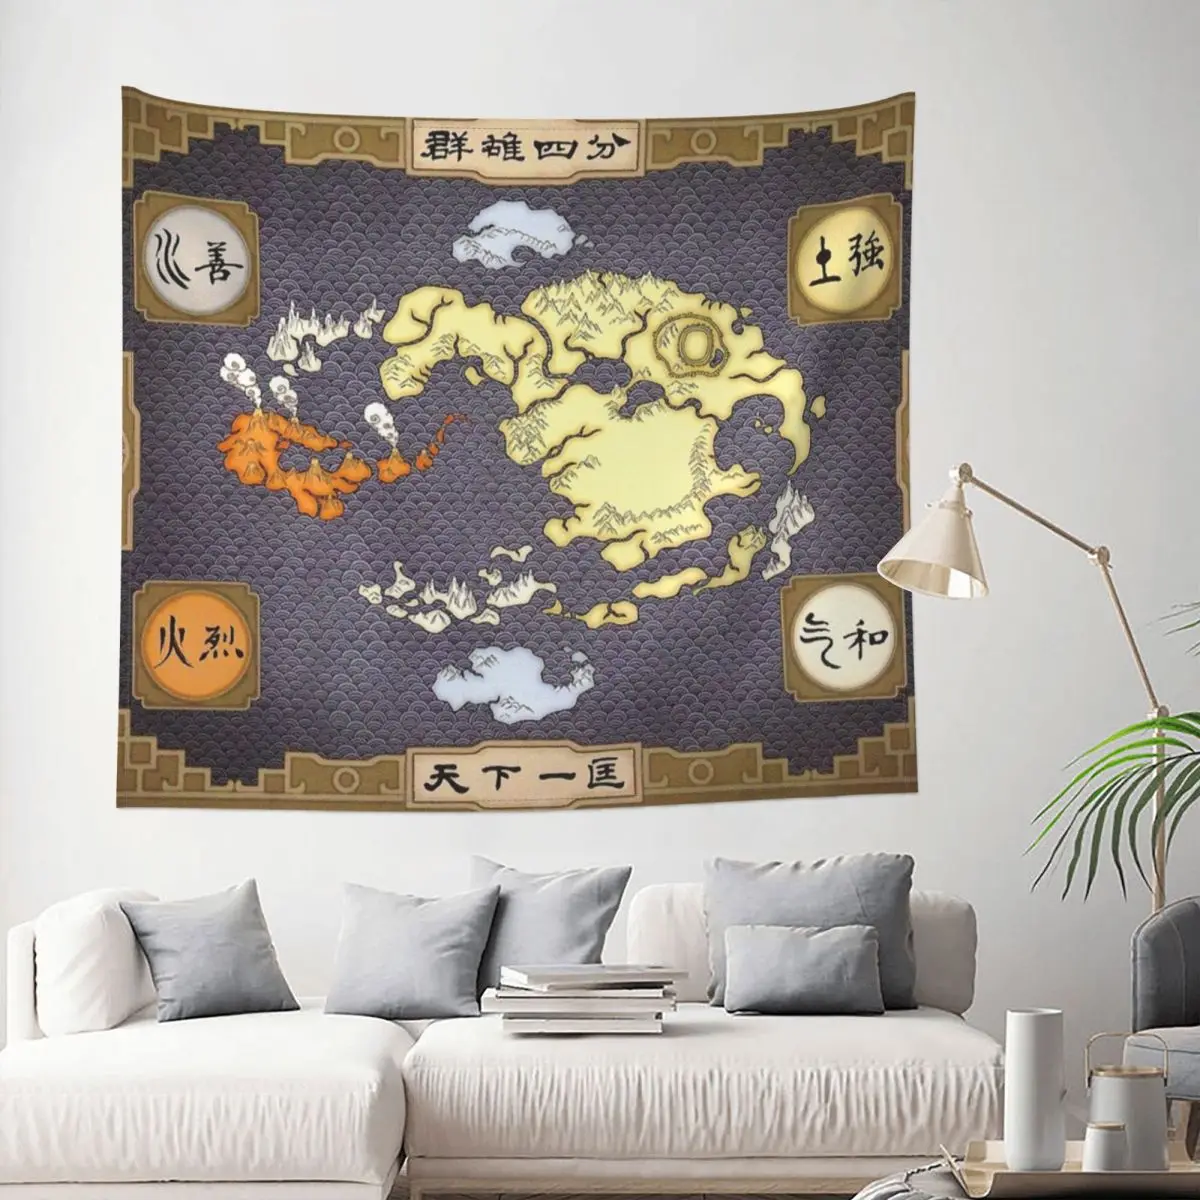 Avatar The Last Airbender Map Tapestry Hippie Polyester Wall Hanging Decoration for Bedroom Table Cover Witchcraft - Avatar The Last Airbender Store